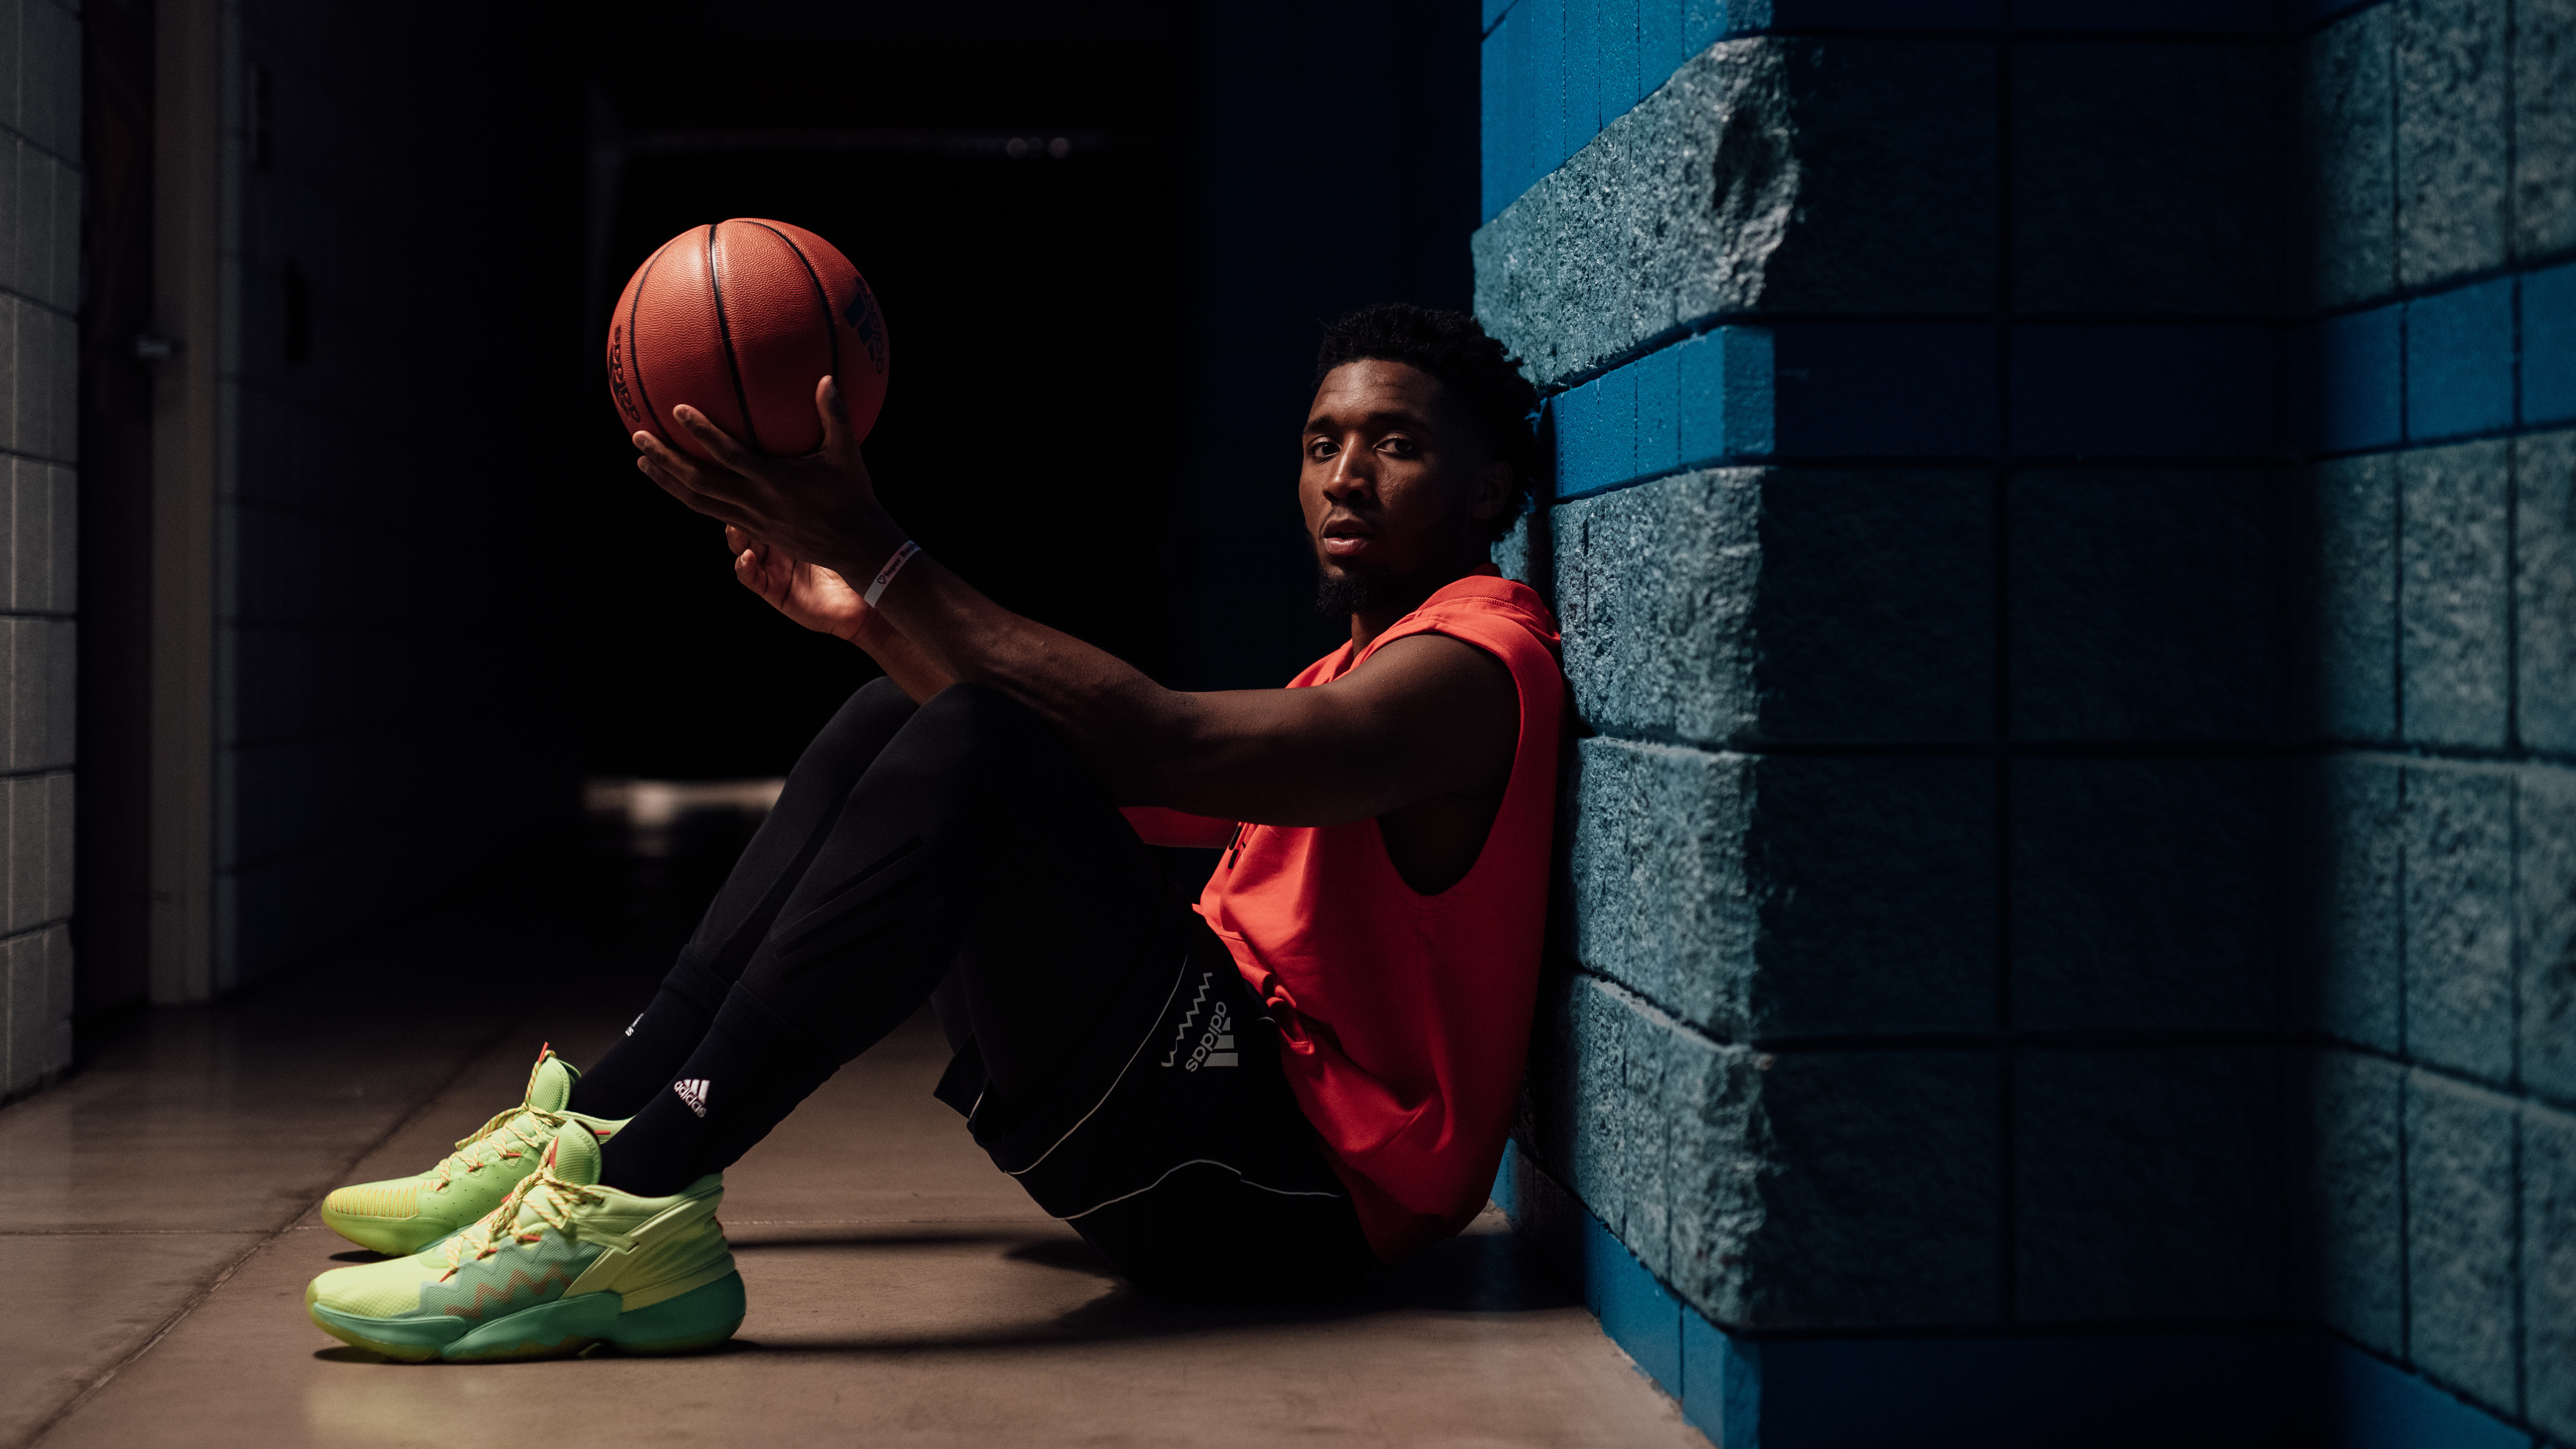 Which NBA players have an Adidas shoe contract? Donovan Mitchell